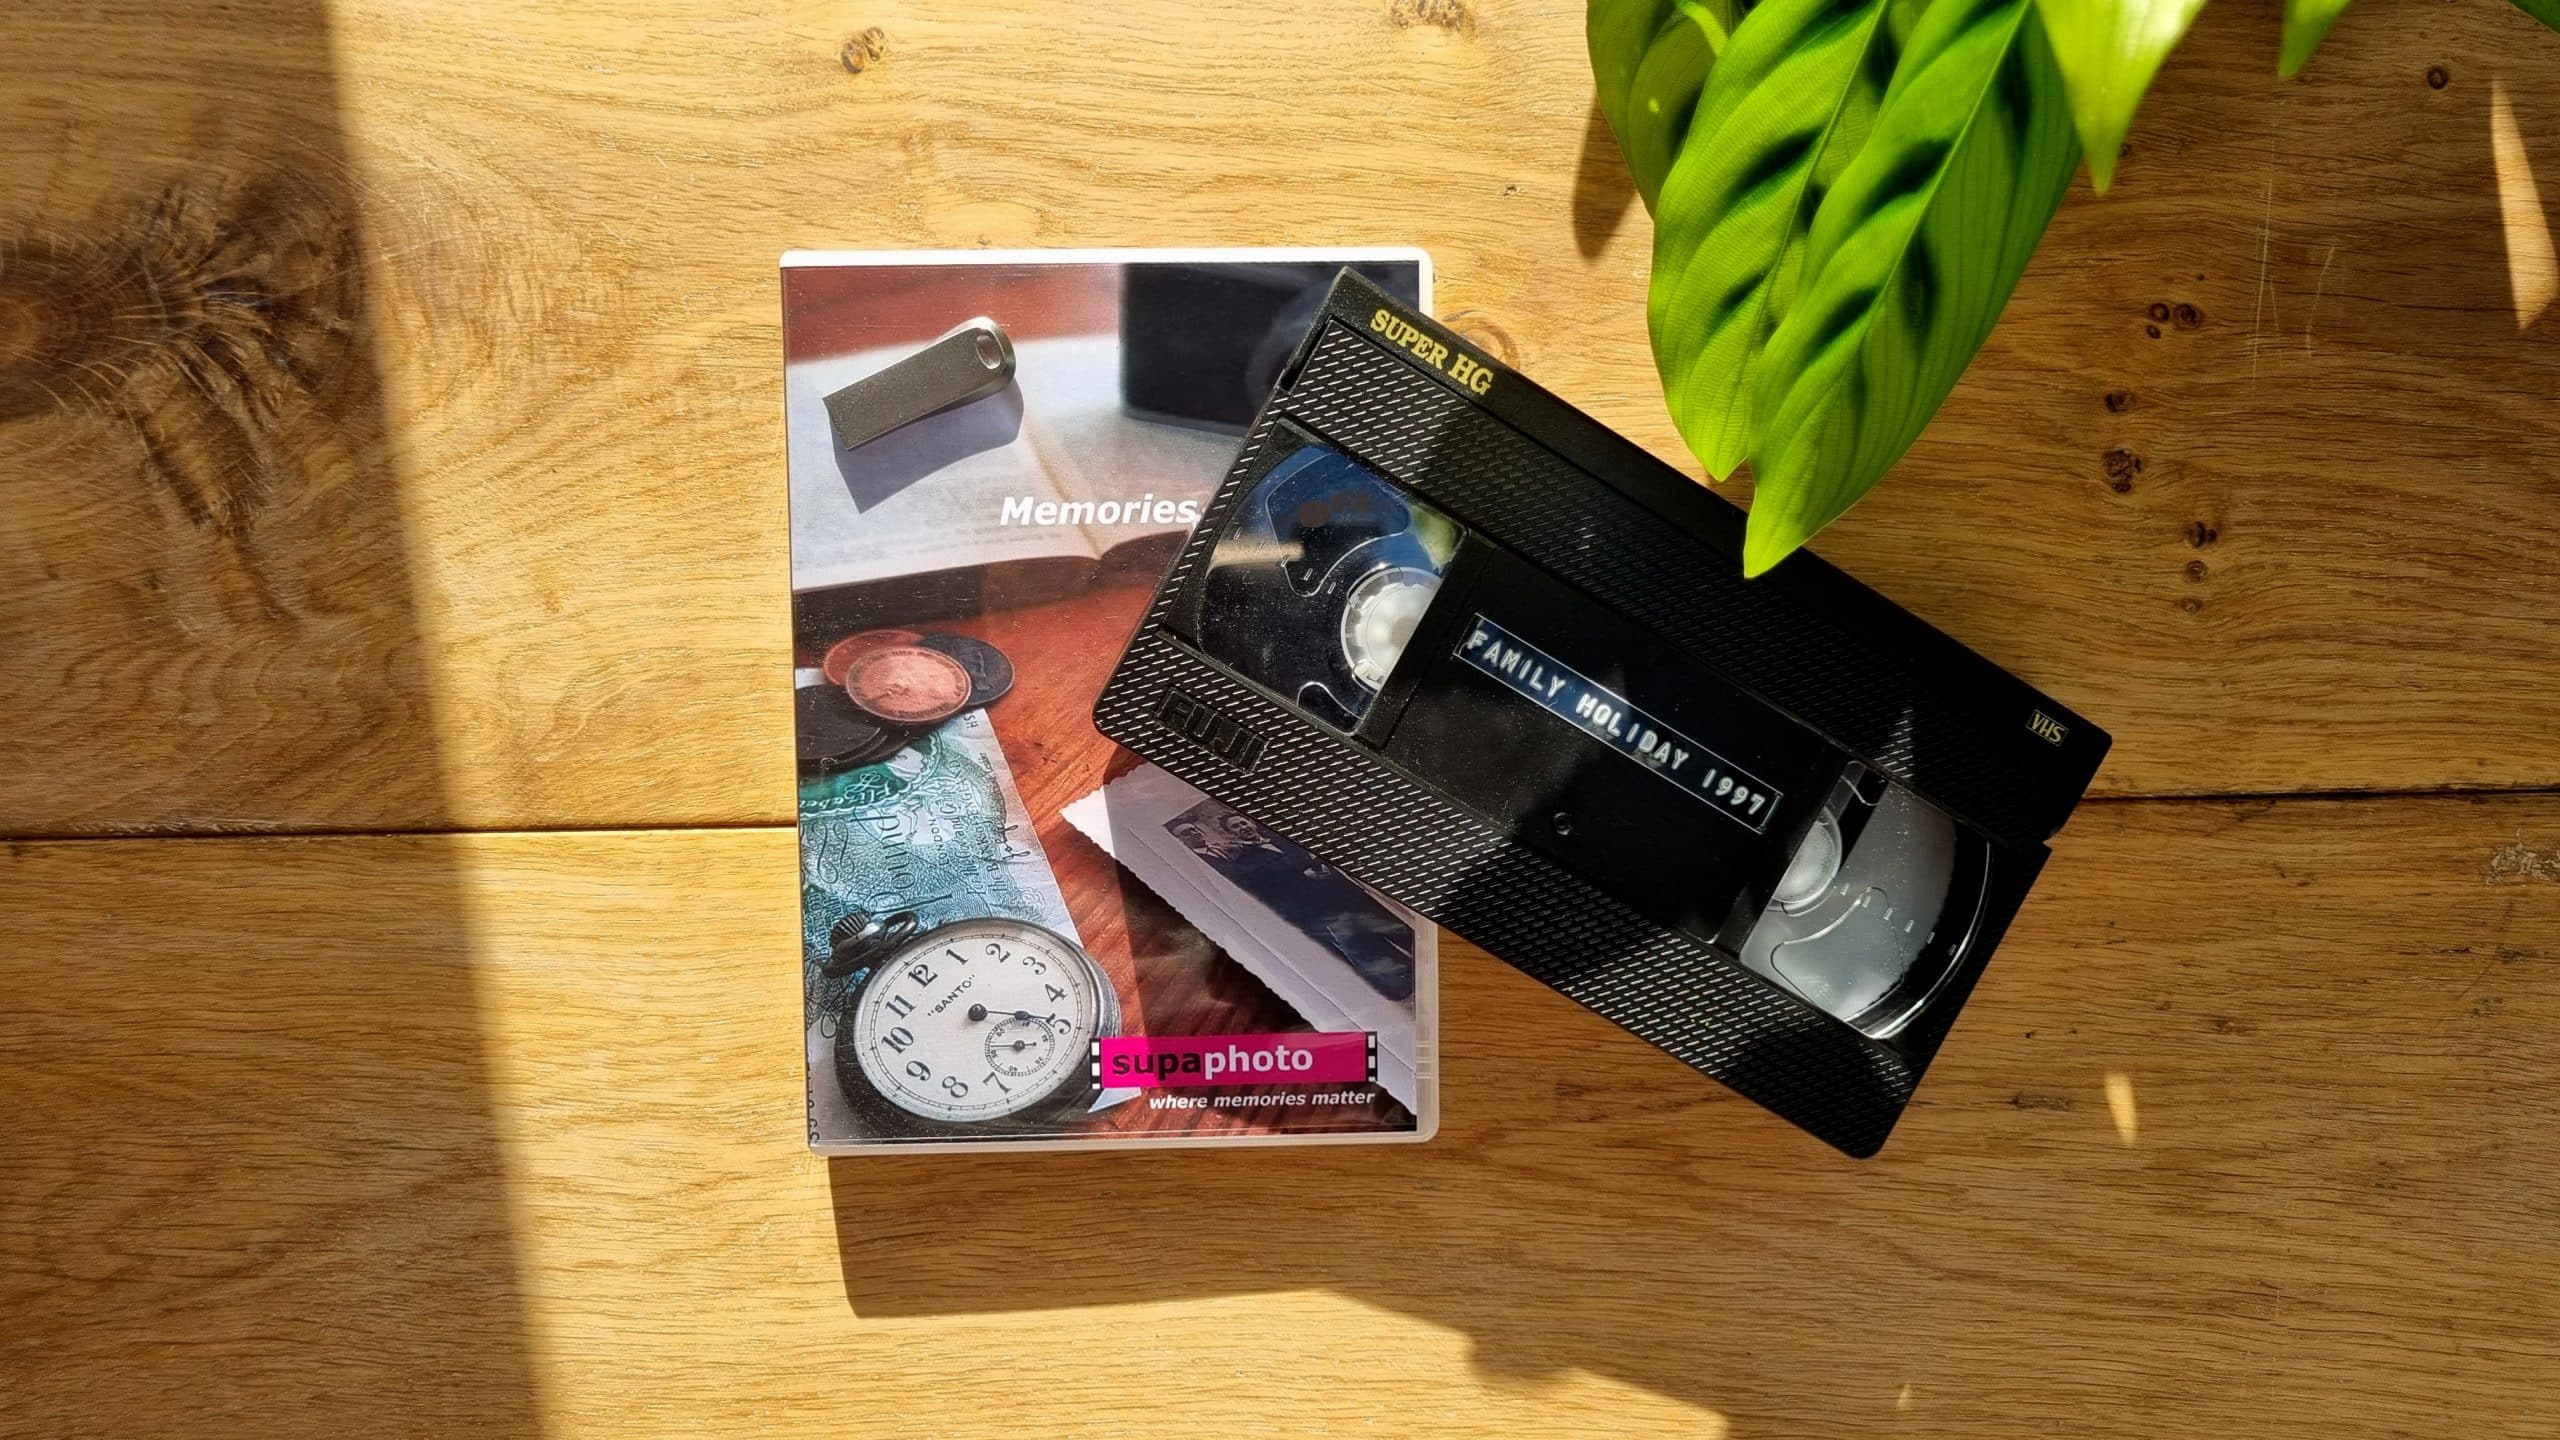 old video tape placed over a dvd and memory stick that are shown with a wooden table behind